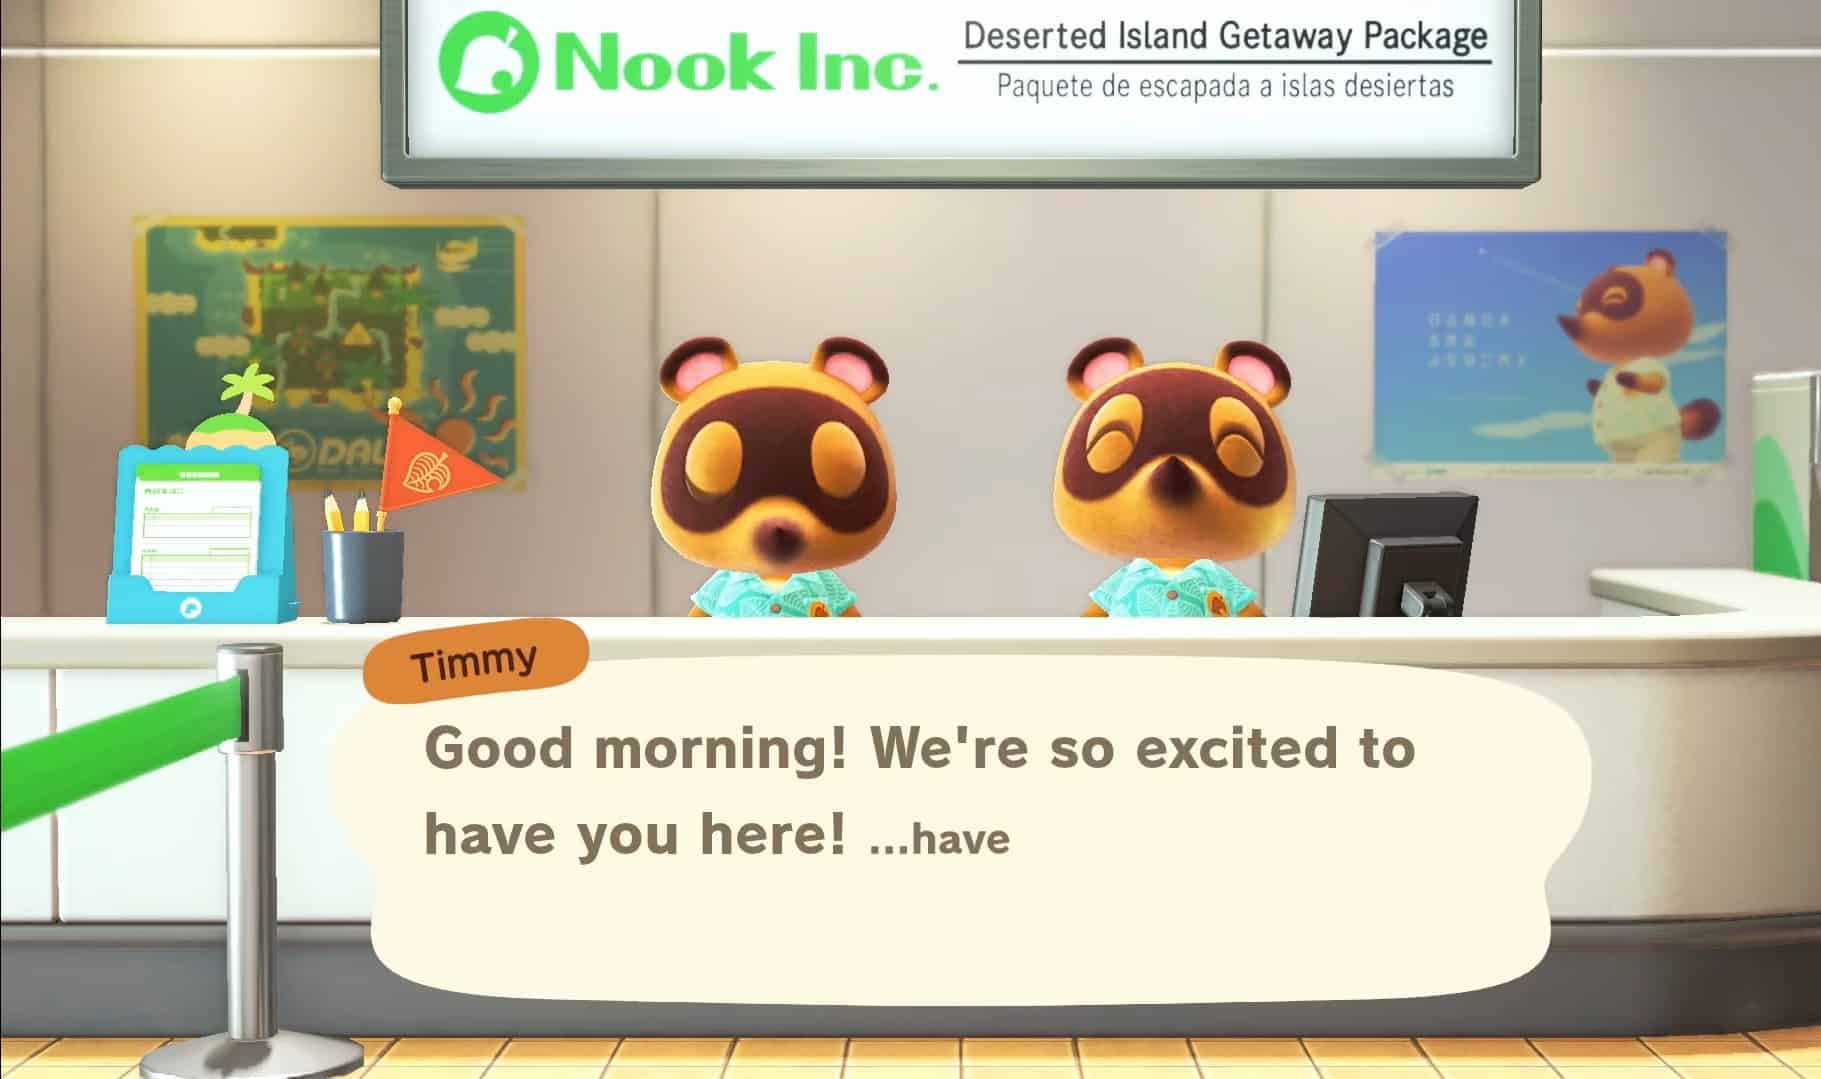 How To Restart Or Reroll Your Island In Animal Crossing New Horizons